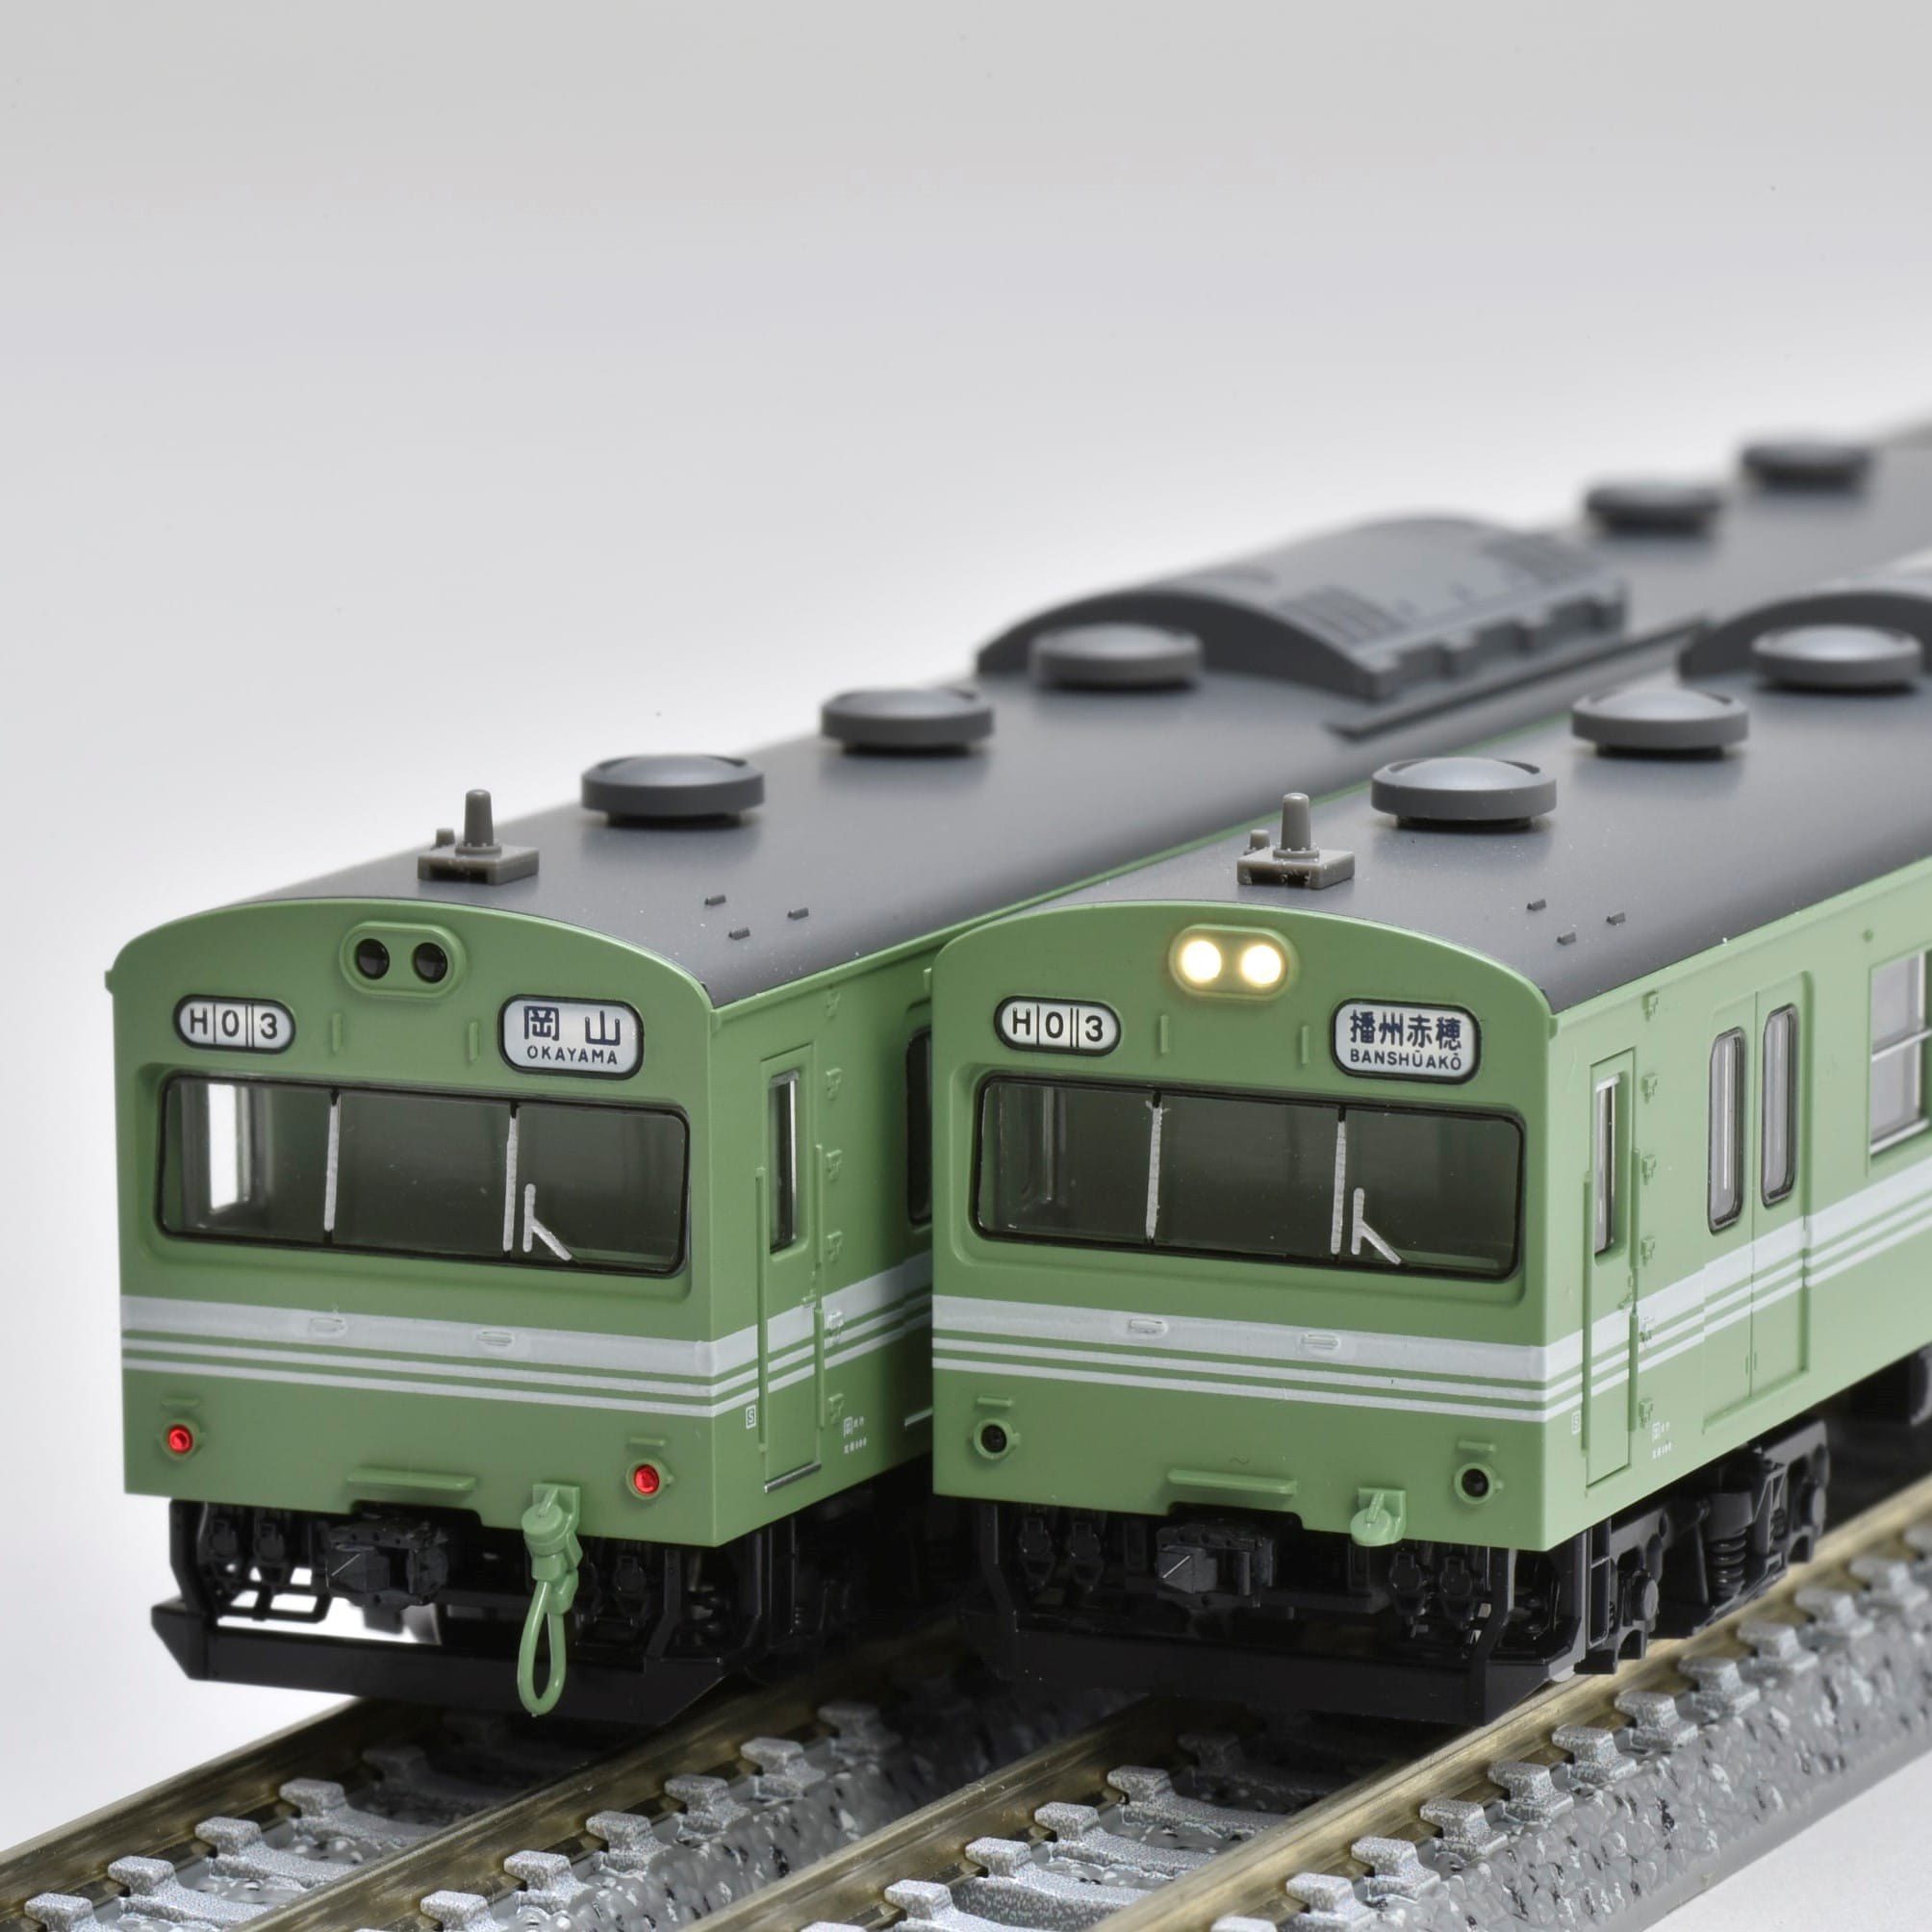 381 series Limited Express“やくも”6両セット: 鉄道グッズJR西日本 